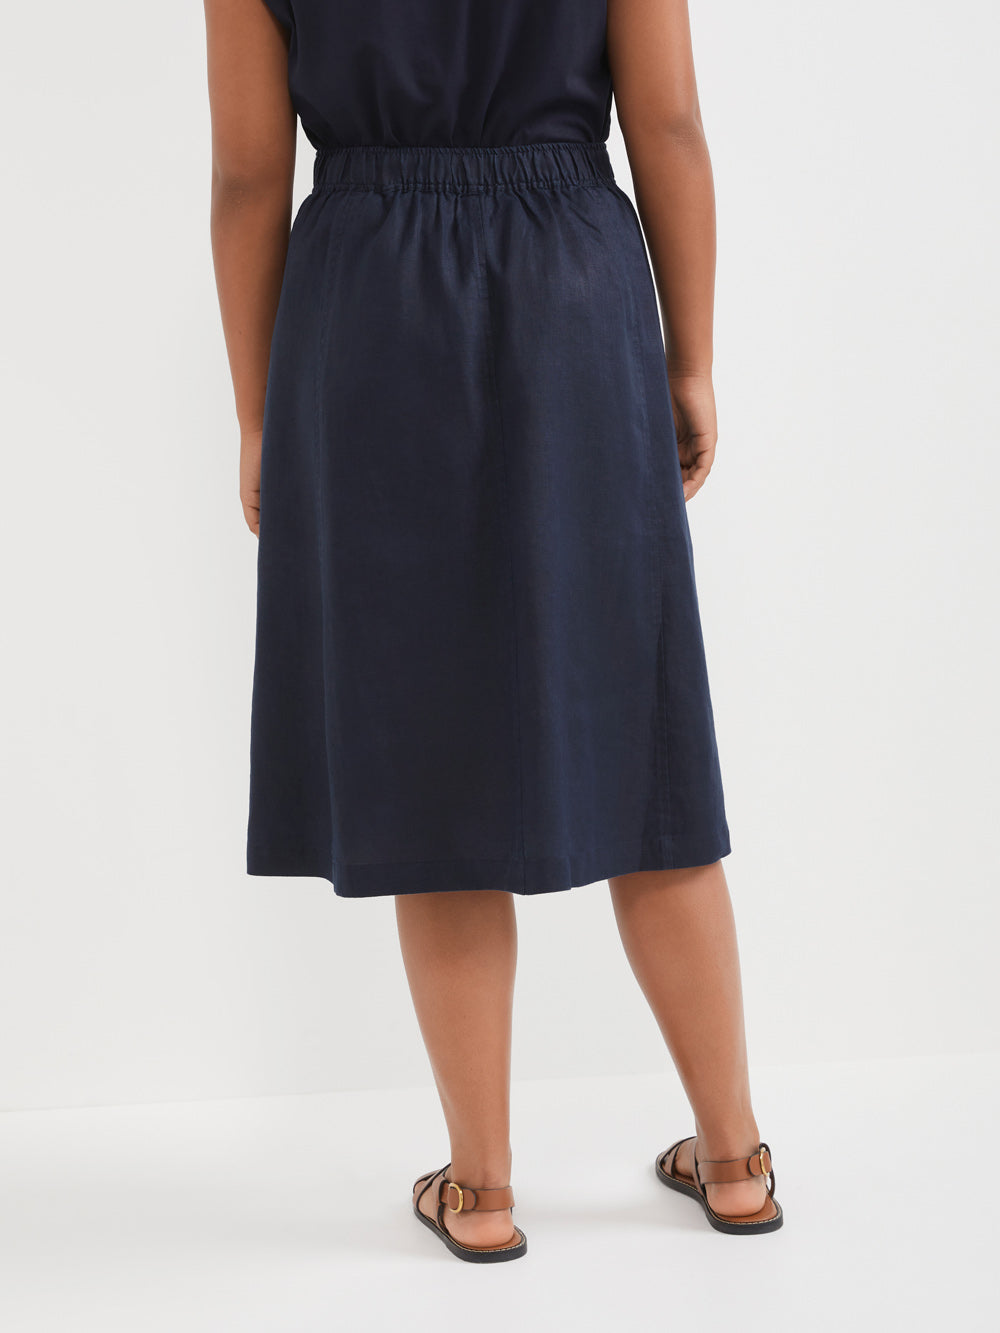 The Washed Linen A-Line Skirt